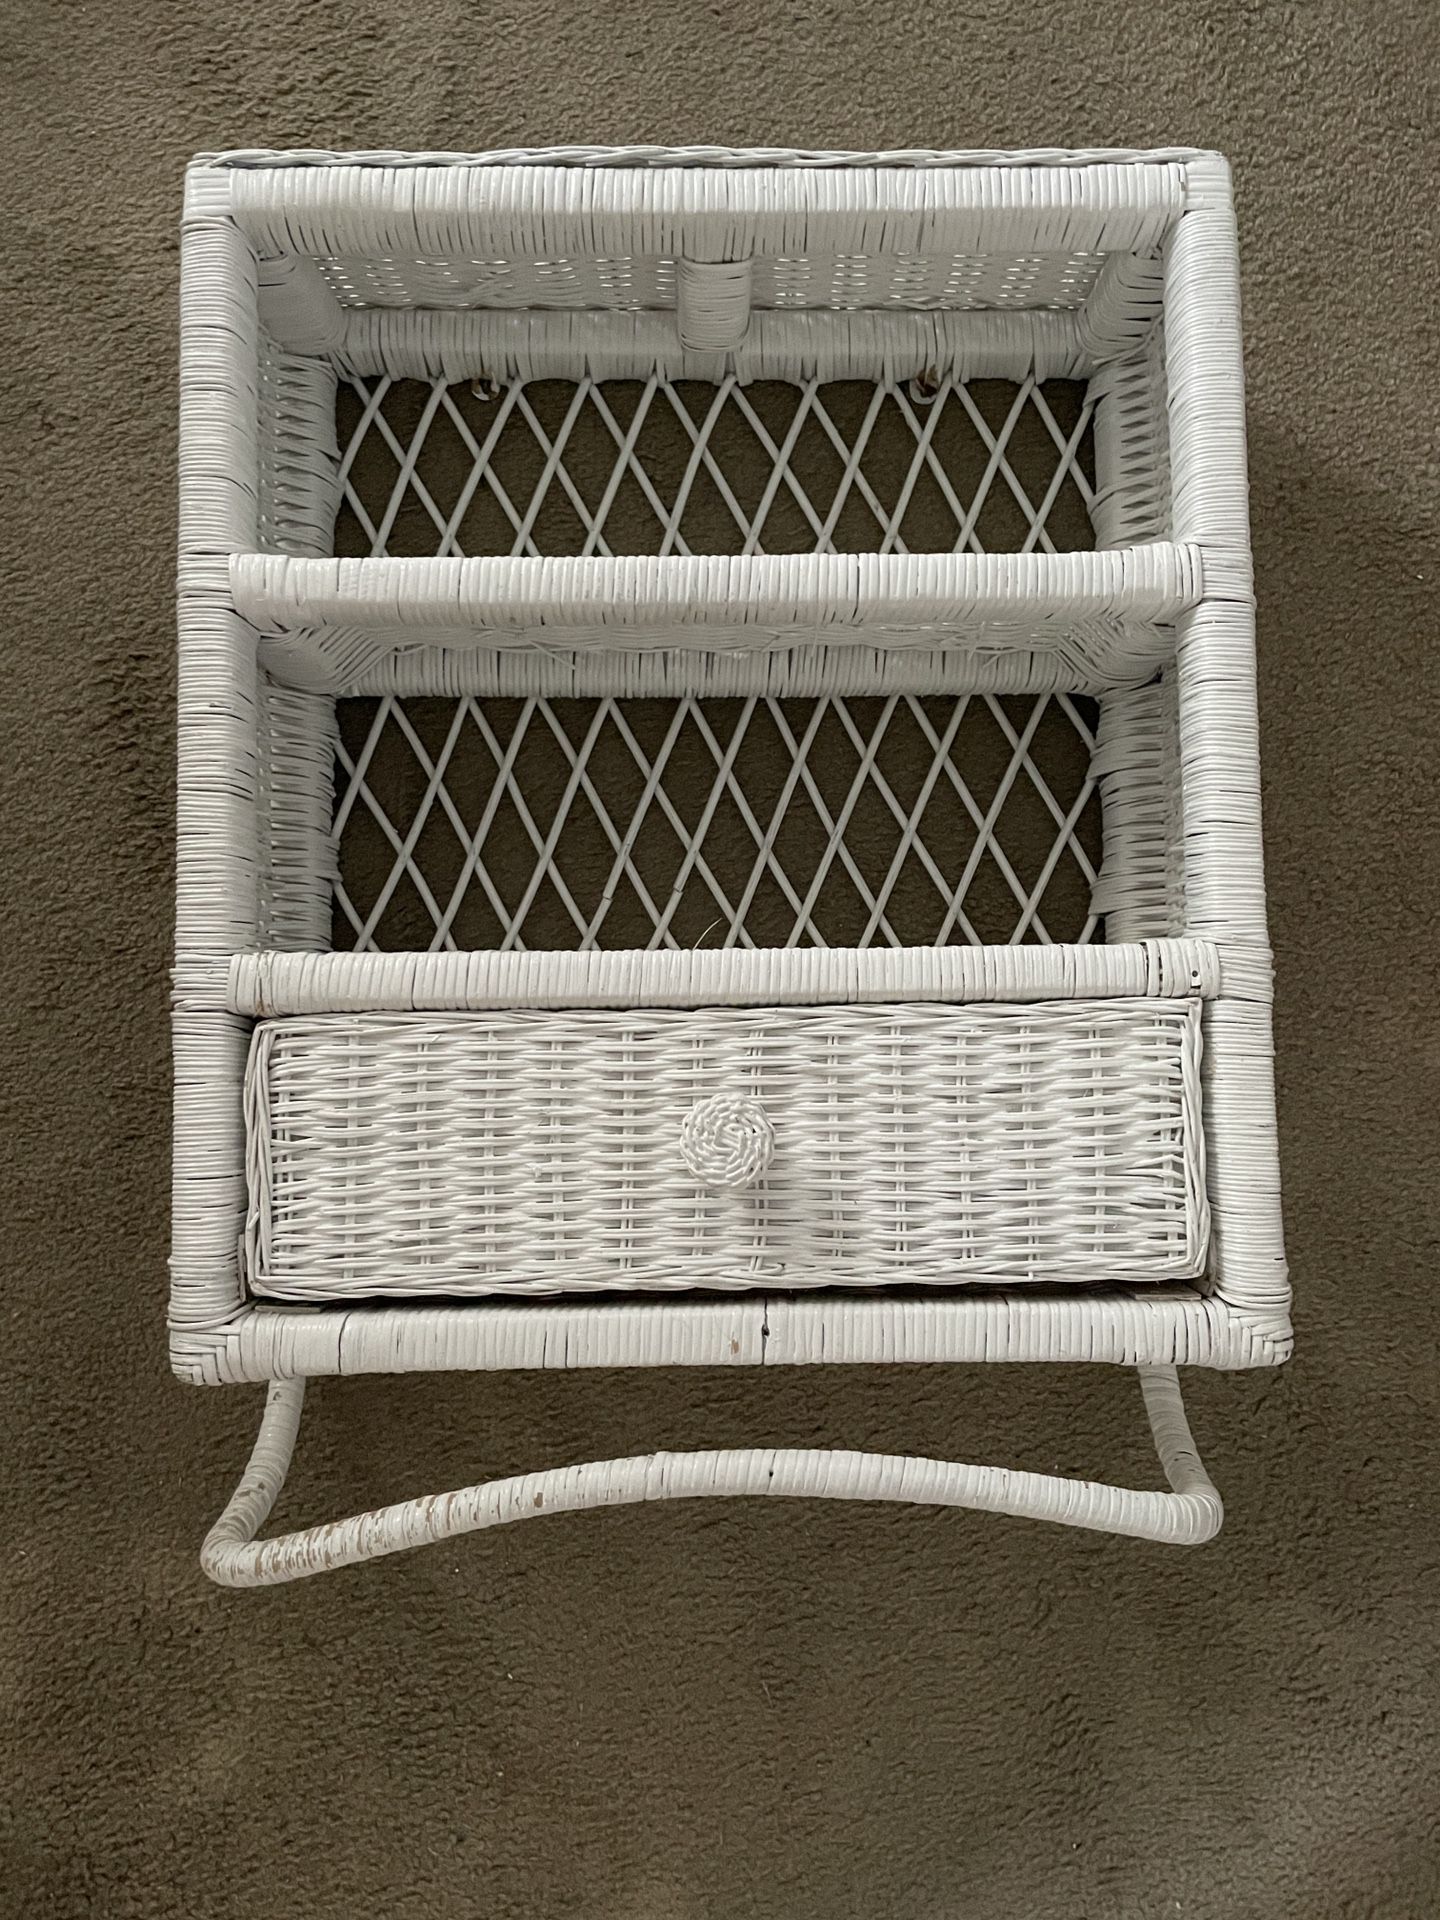 Wicker Wall Shelving Unit With Drawer And Rack For Towels